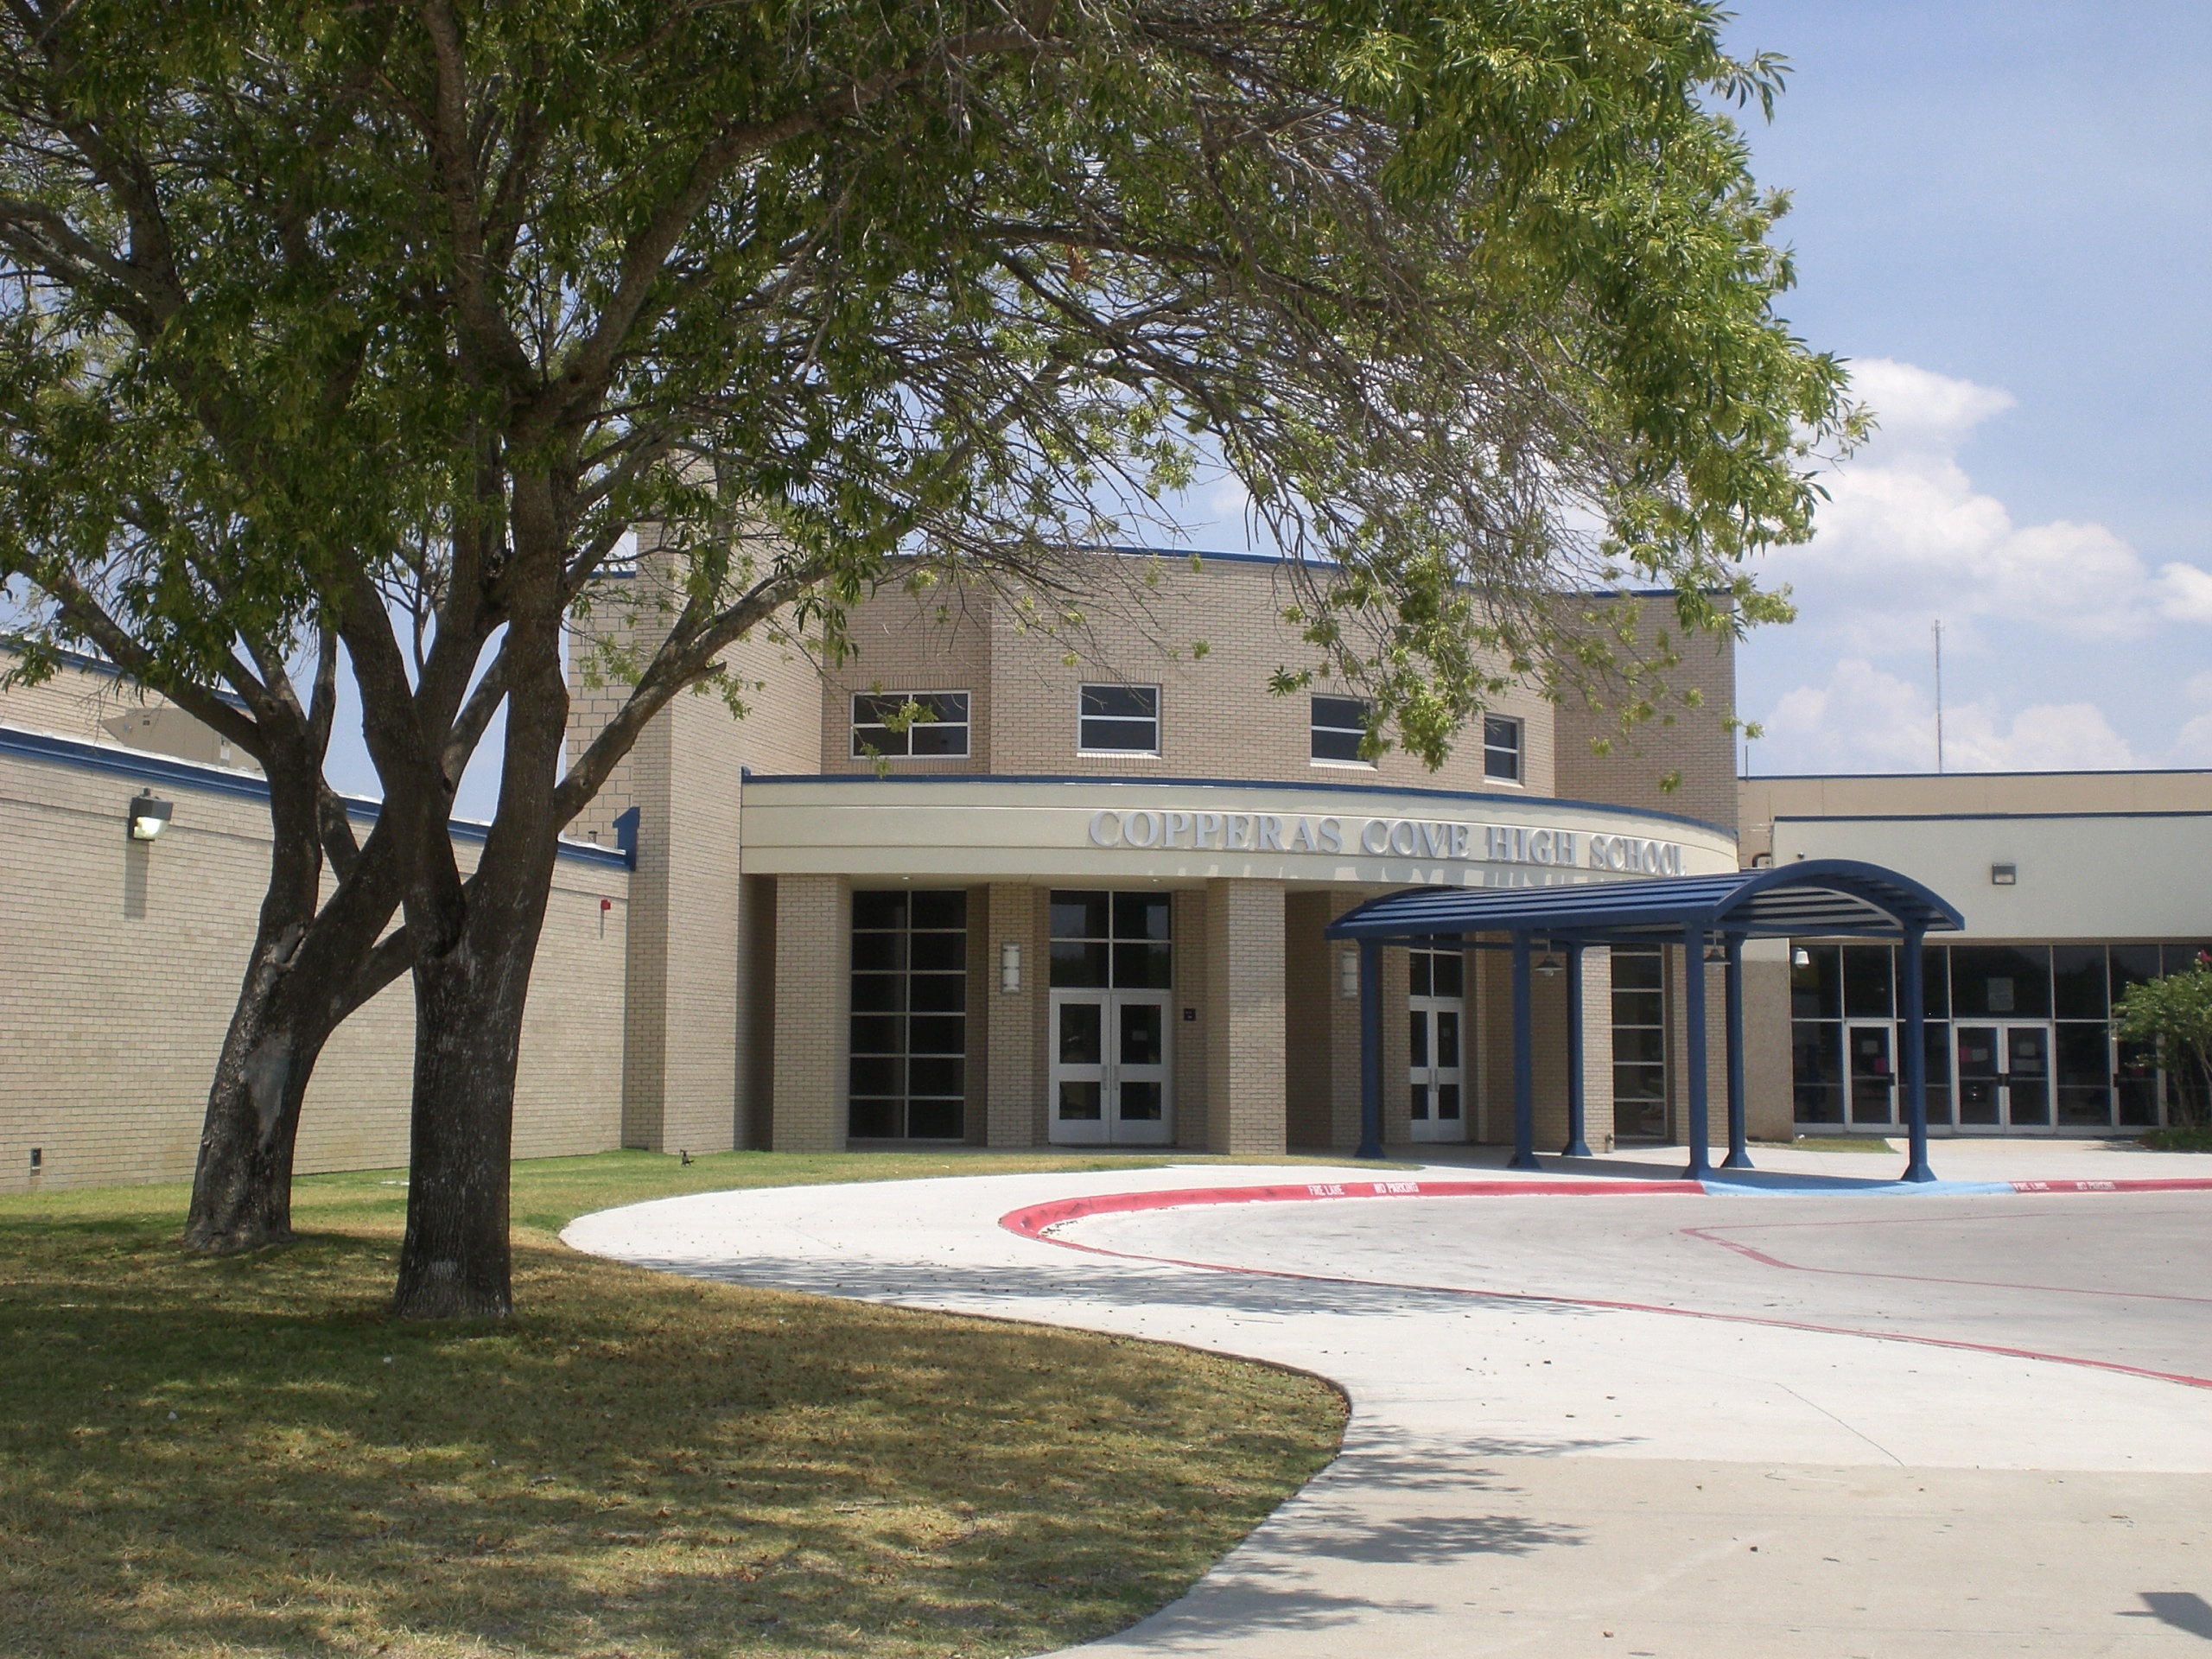 Teachers Could Make Up To $100,000, A New Initiative Done By Copperas Cove ISD